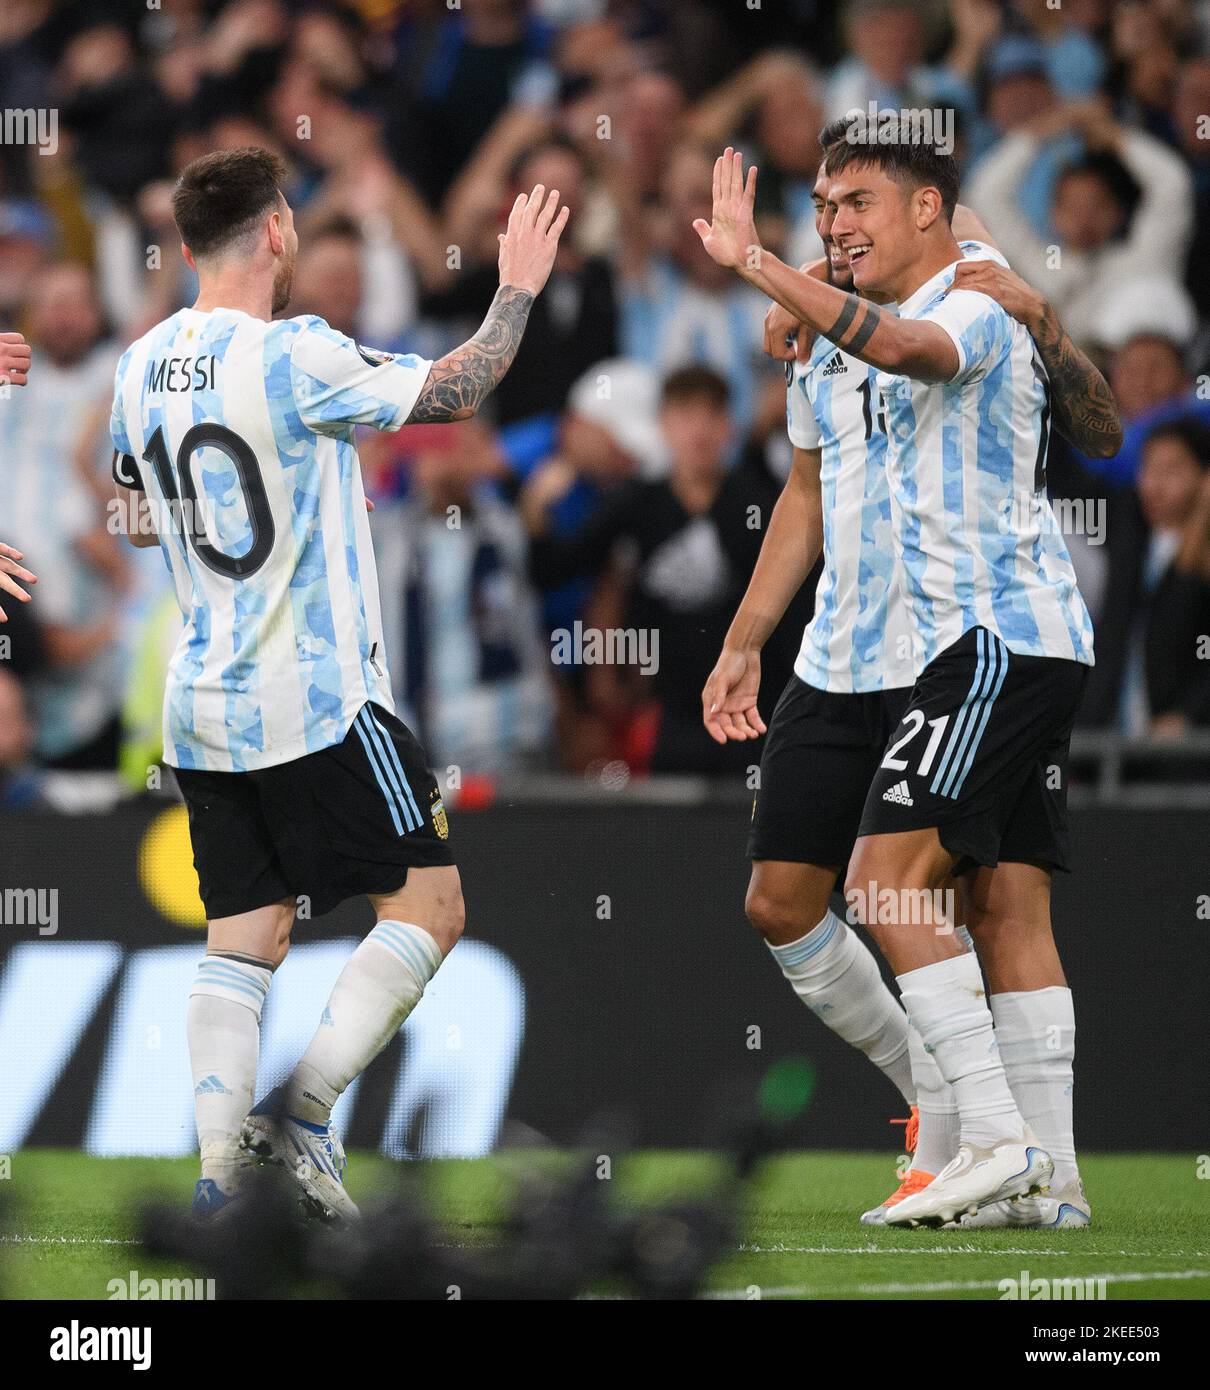 01 Jun 2022 - Italy v Argentina - Finalissima 2022 - Wembley Stadium  Paolo Dybala celebrates his goal with Lionel Messi during the match against Italy at Wembley Stadium. Picture Credit : © Mark Pain / Alamy Stock Photo